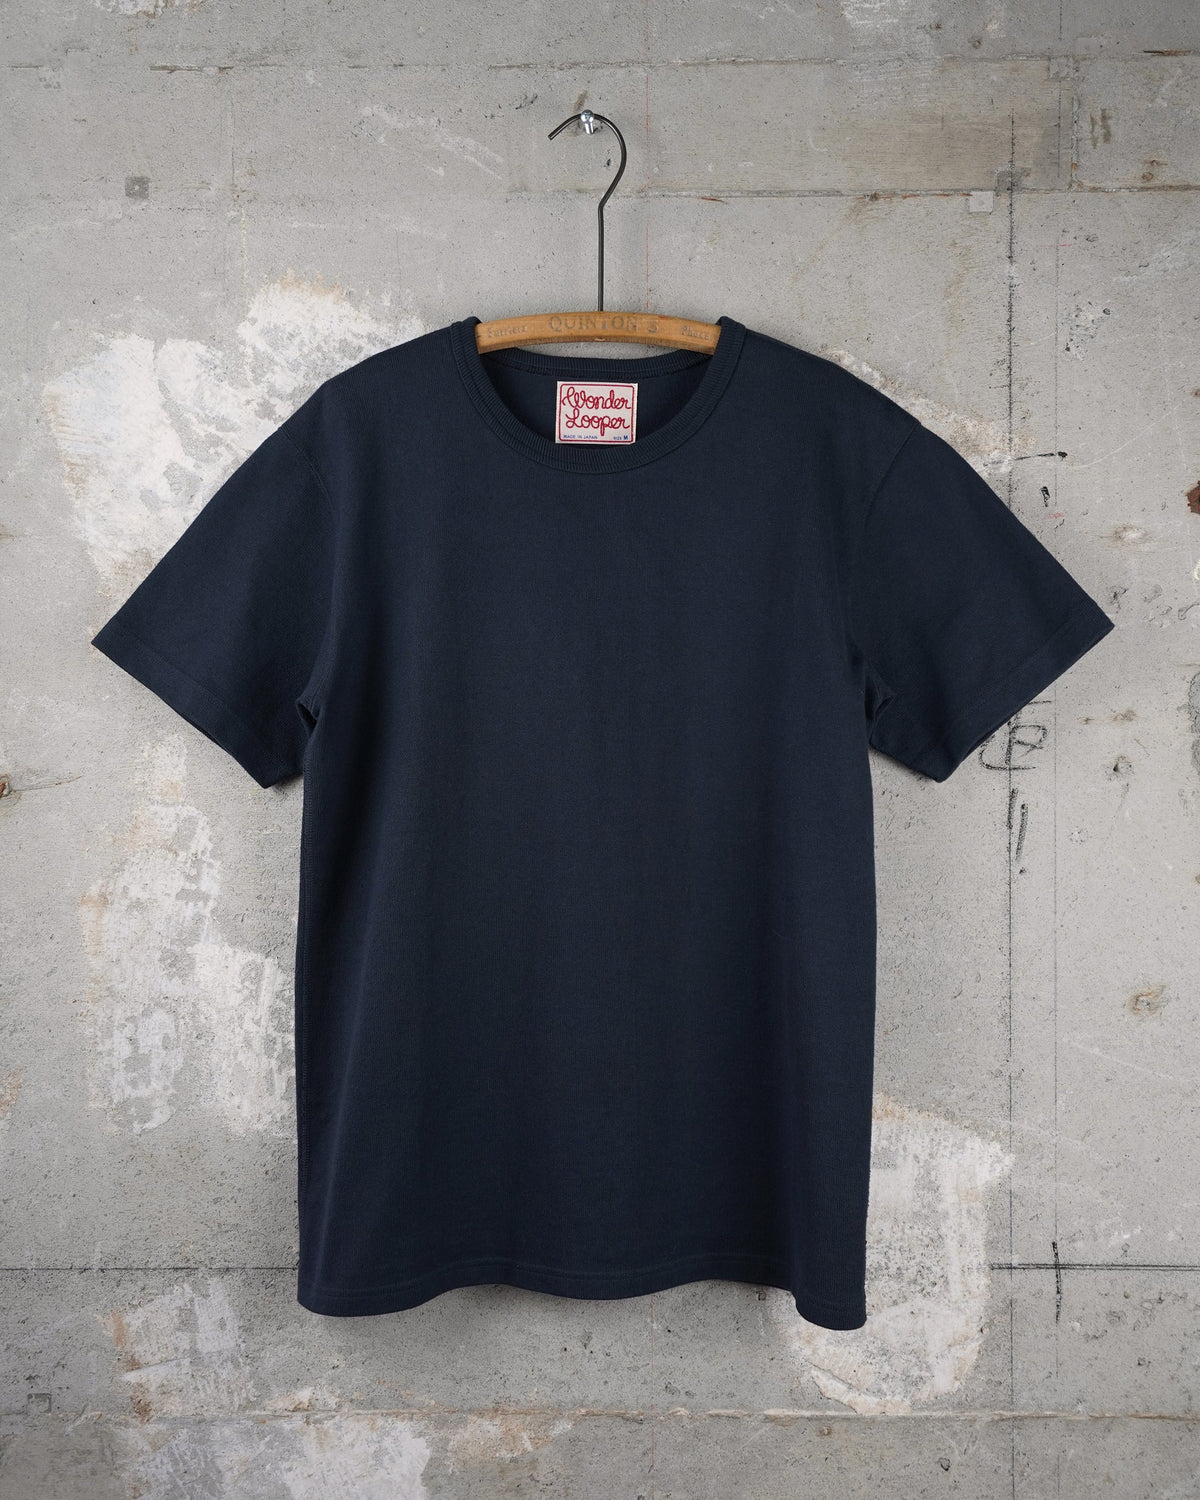 WONDER LOOPER 409gsm double heavyweight T-Shirt - Navy (Excluded from all discount codes)